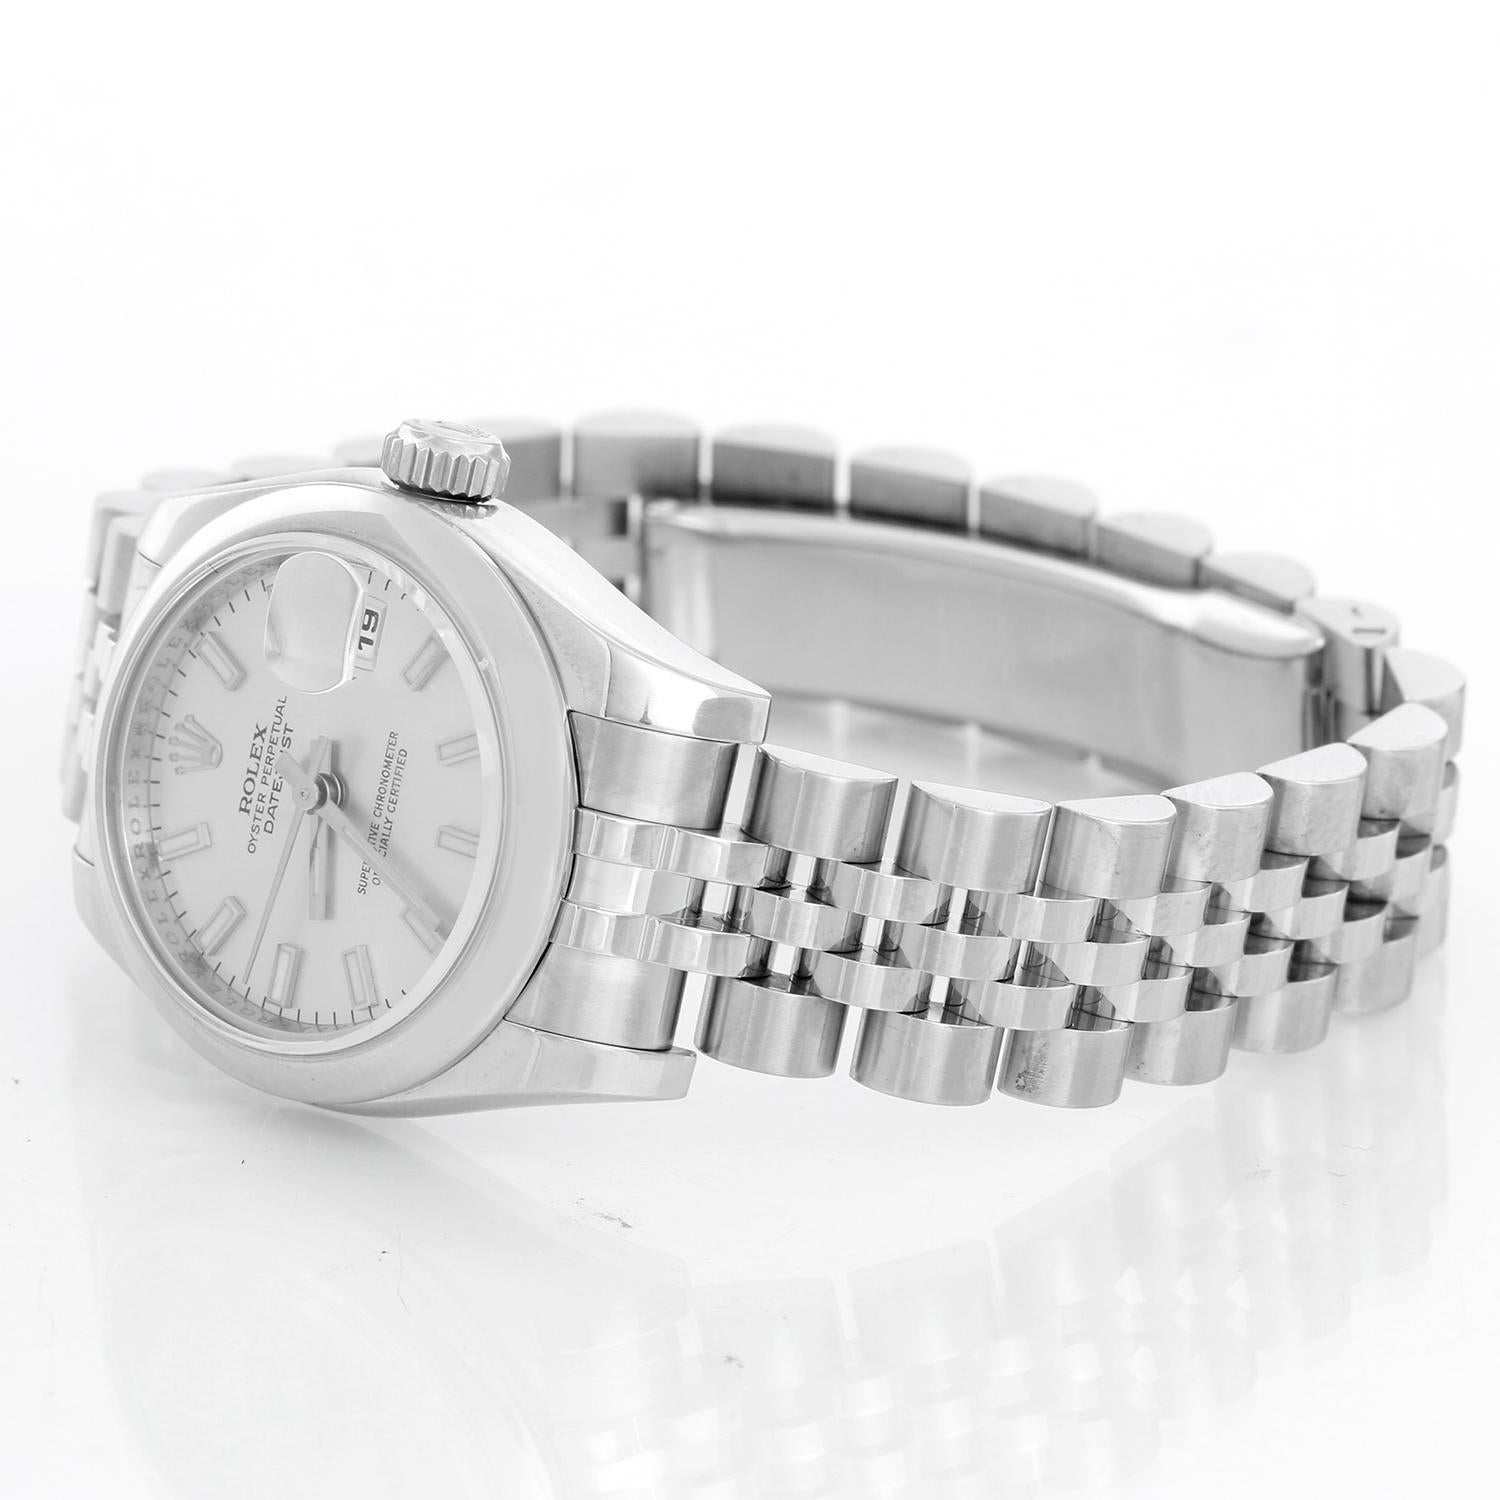 Rolex  Ladies Datejust Watch Steel with Silver Dial  179160 - Automatic winding; 31 jewel; sapphire crystal. Stainless steel case with smooth bezel (26mm diameter). Silver dial with stick hour markers. Stainless steel Jubilee bracelet. Pre-owned